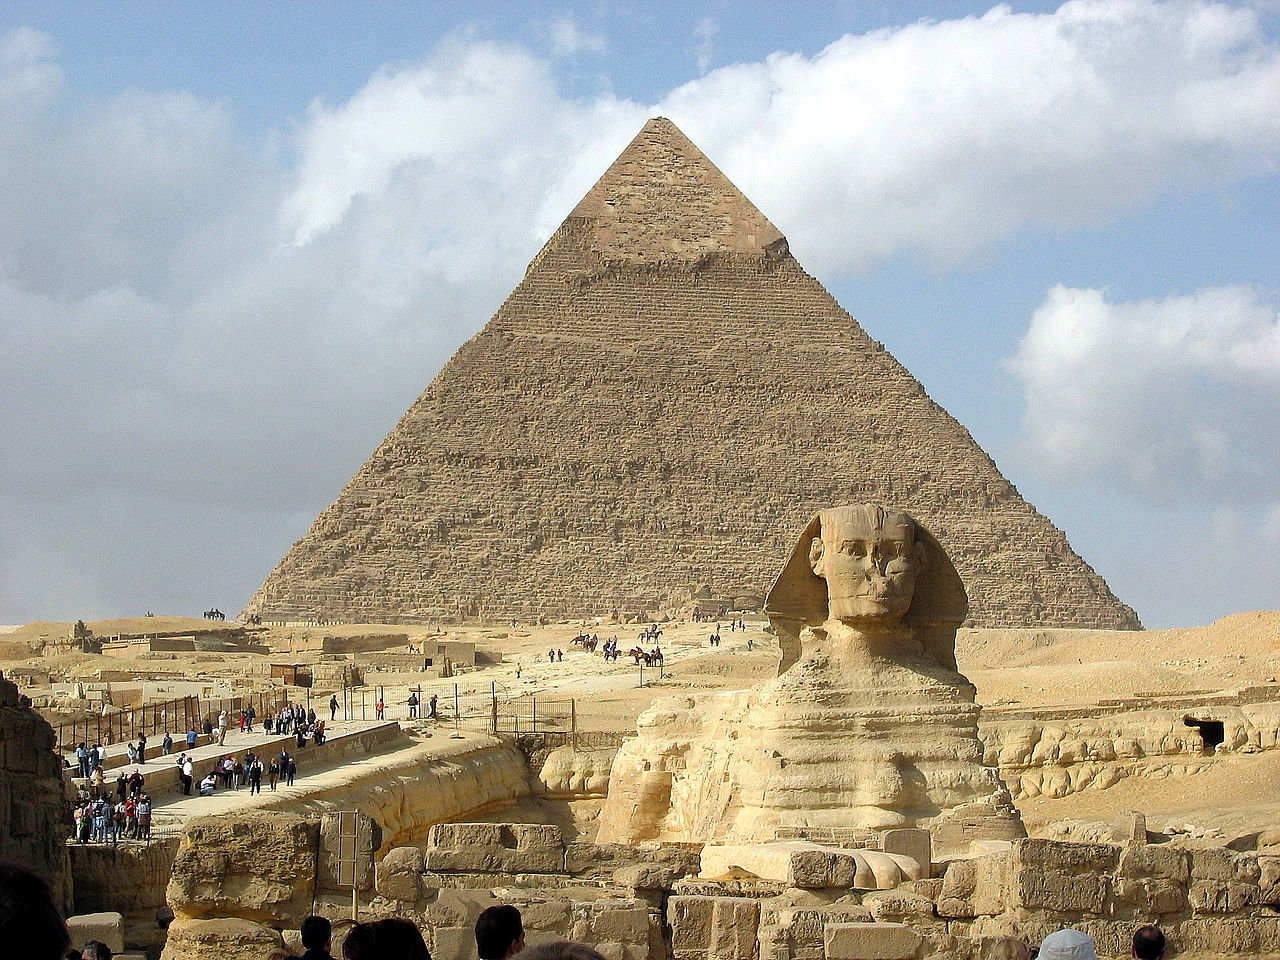 what is a sphinx where did the female winged creature come from and what does it mean in greek